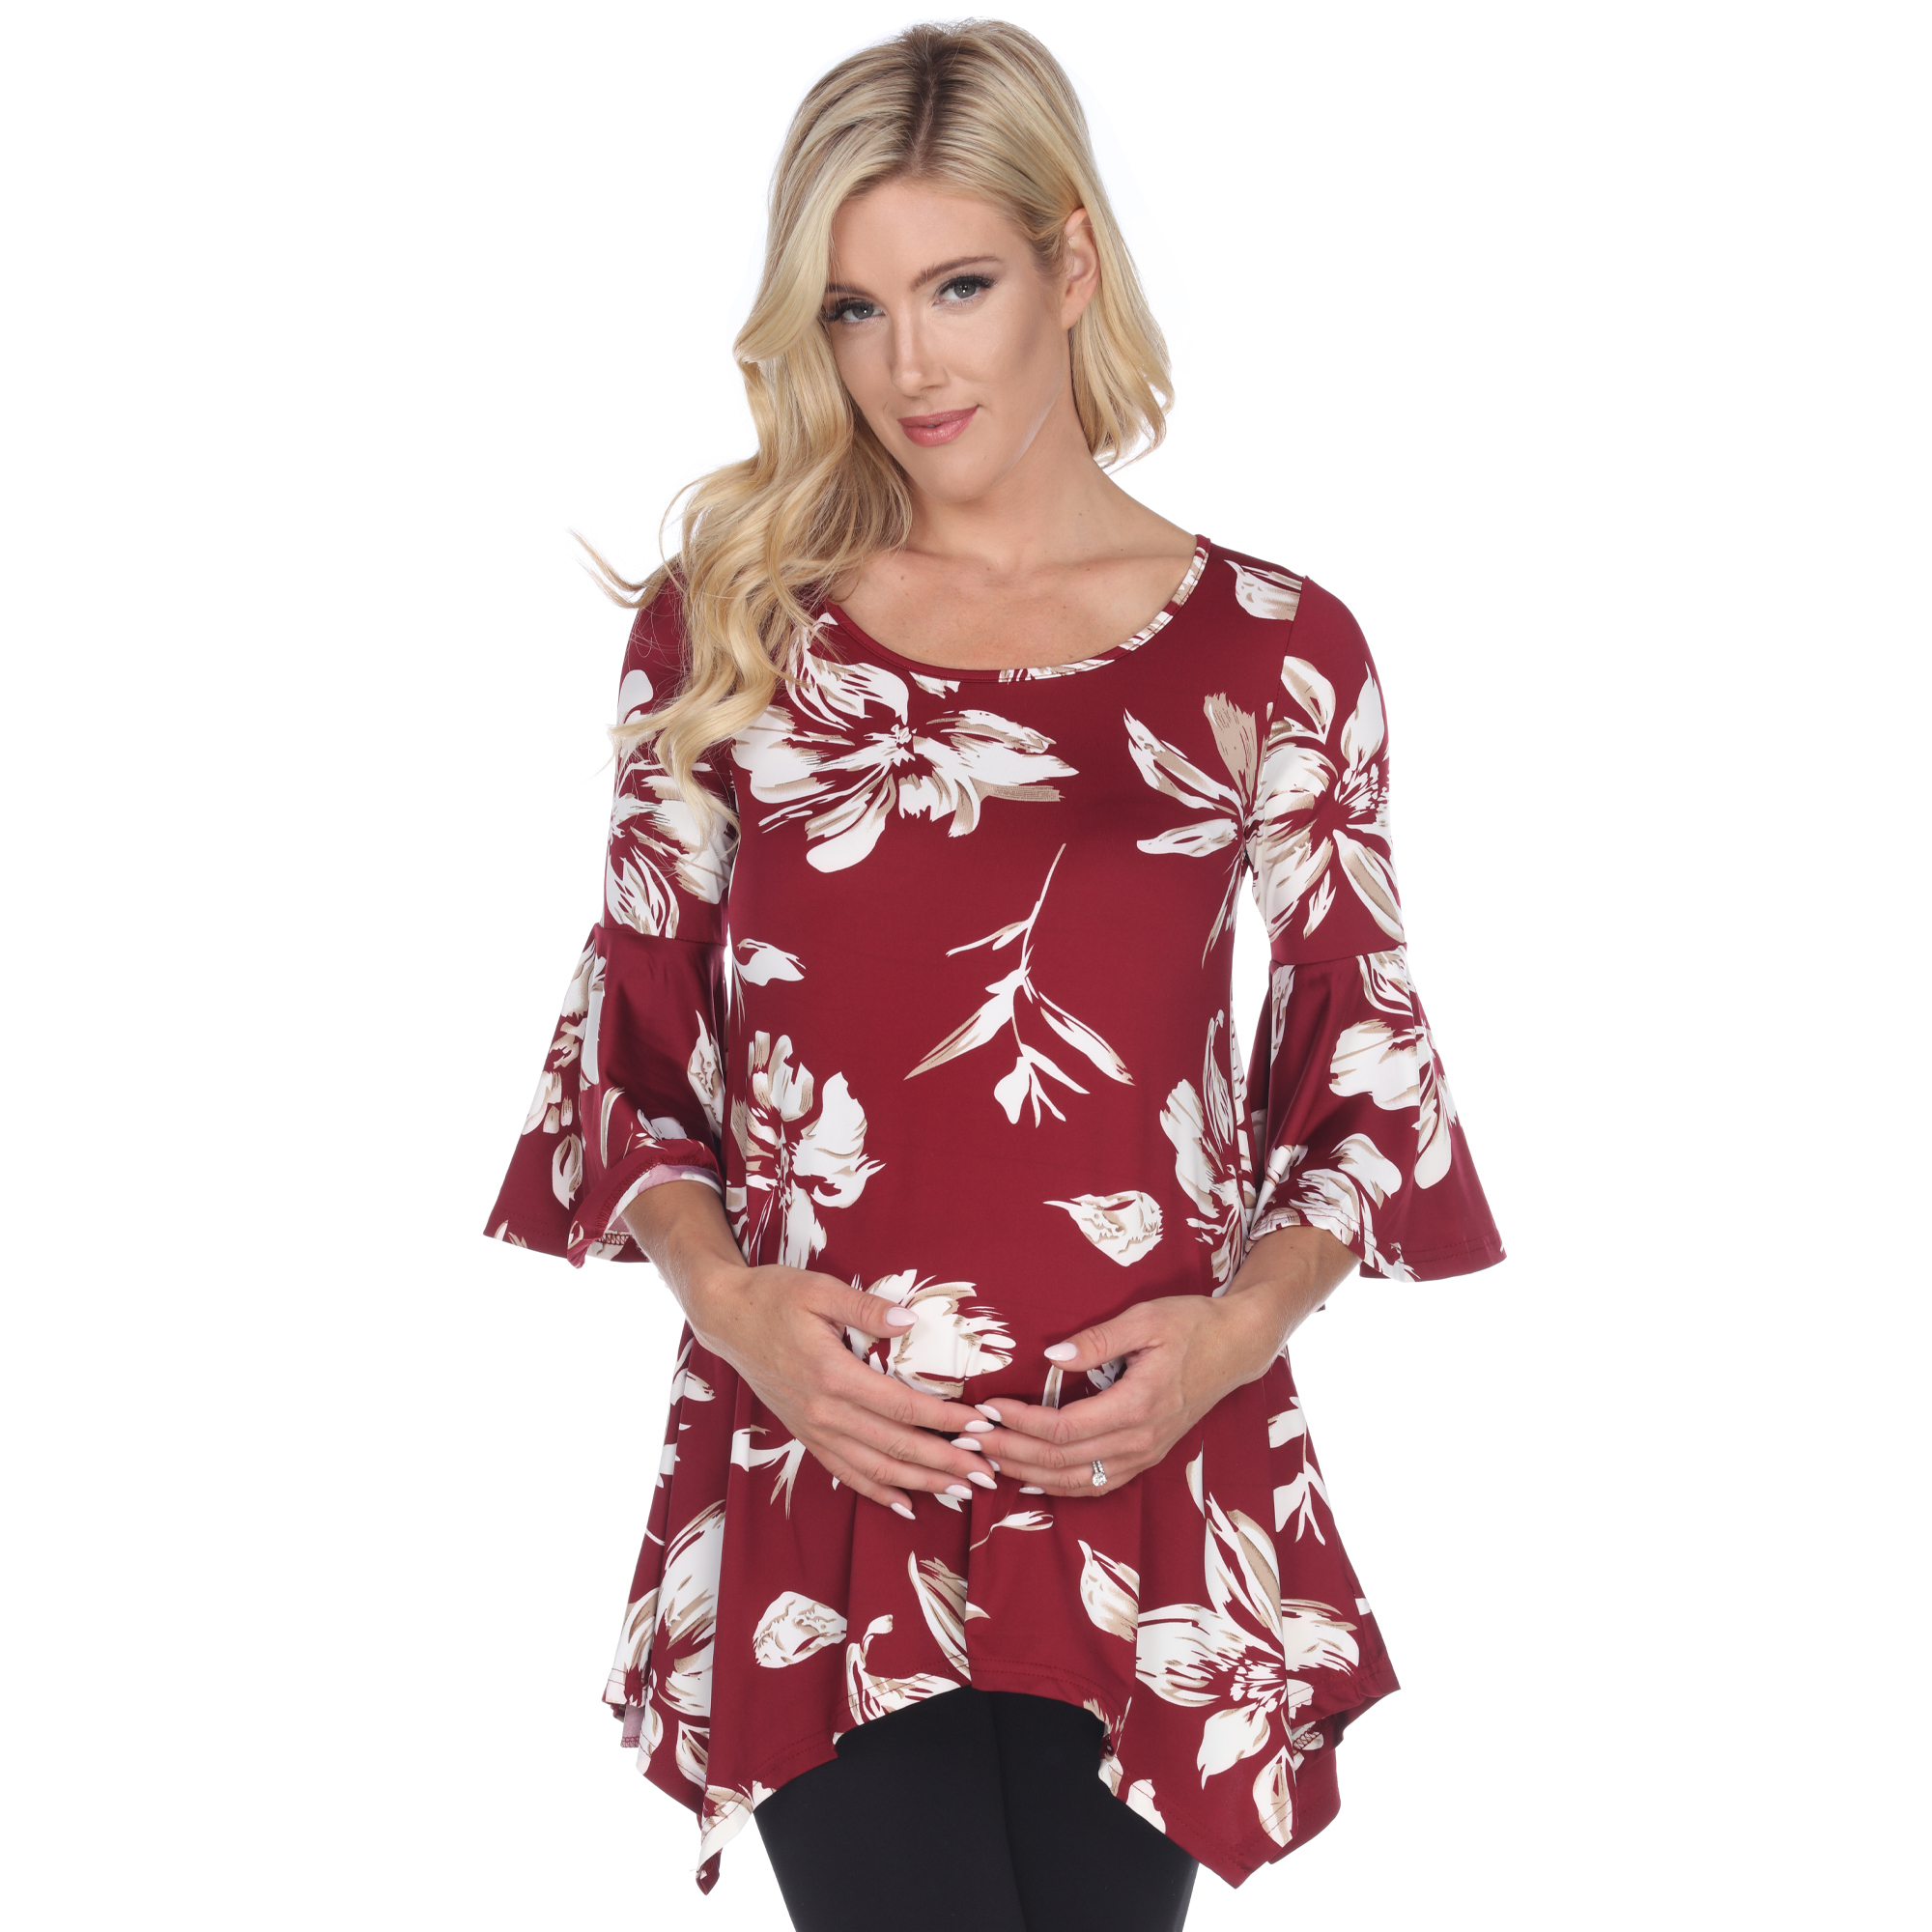 White Mark Women's Maternity Floral Print Quarter Sleeve Tunic Top With Pockets - Red, Medium